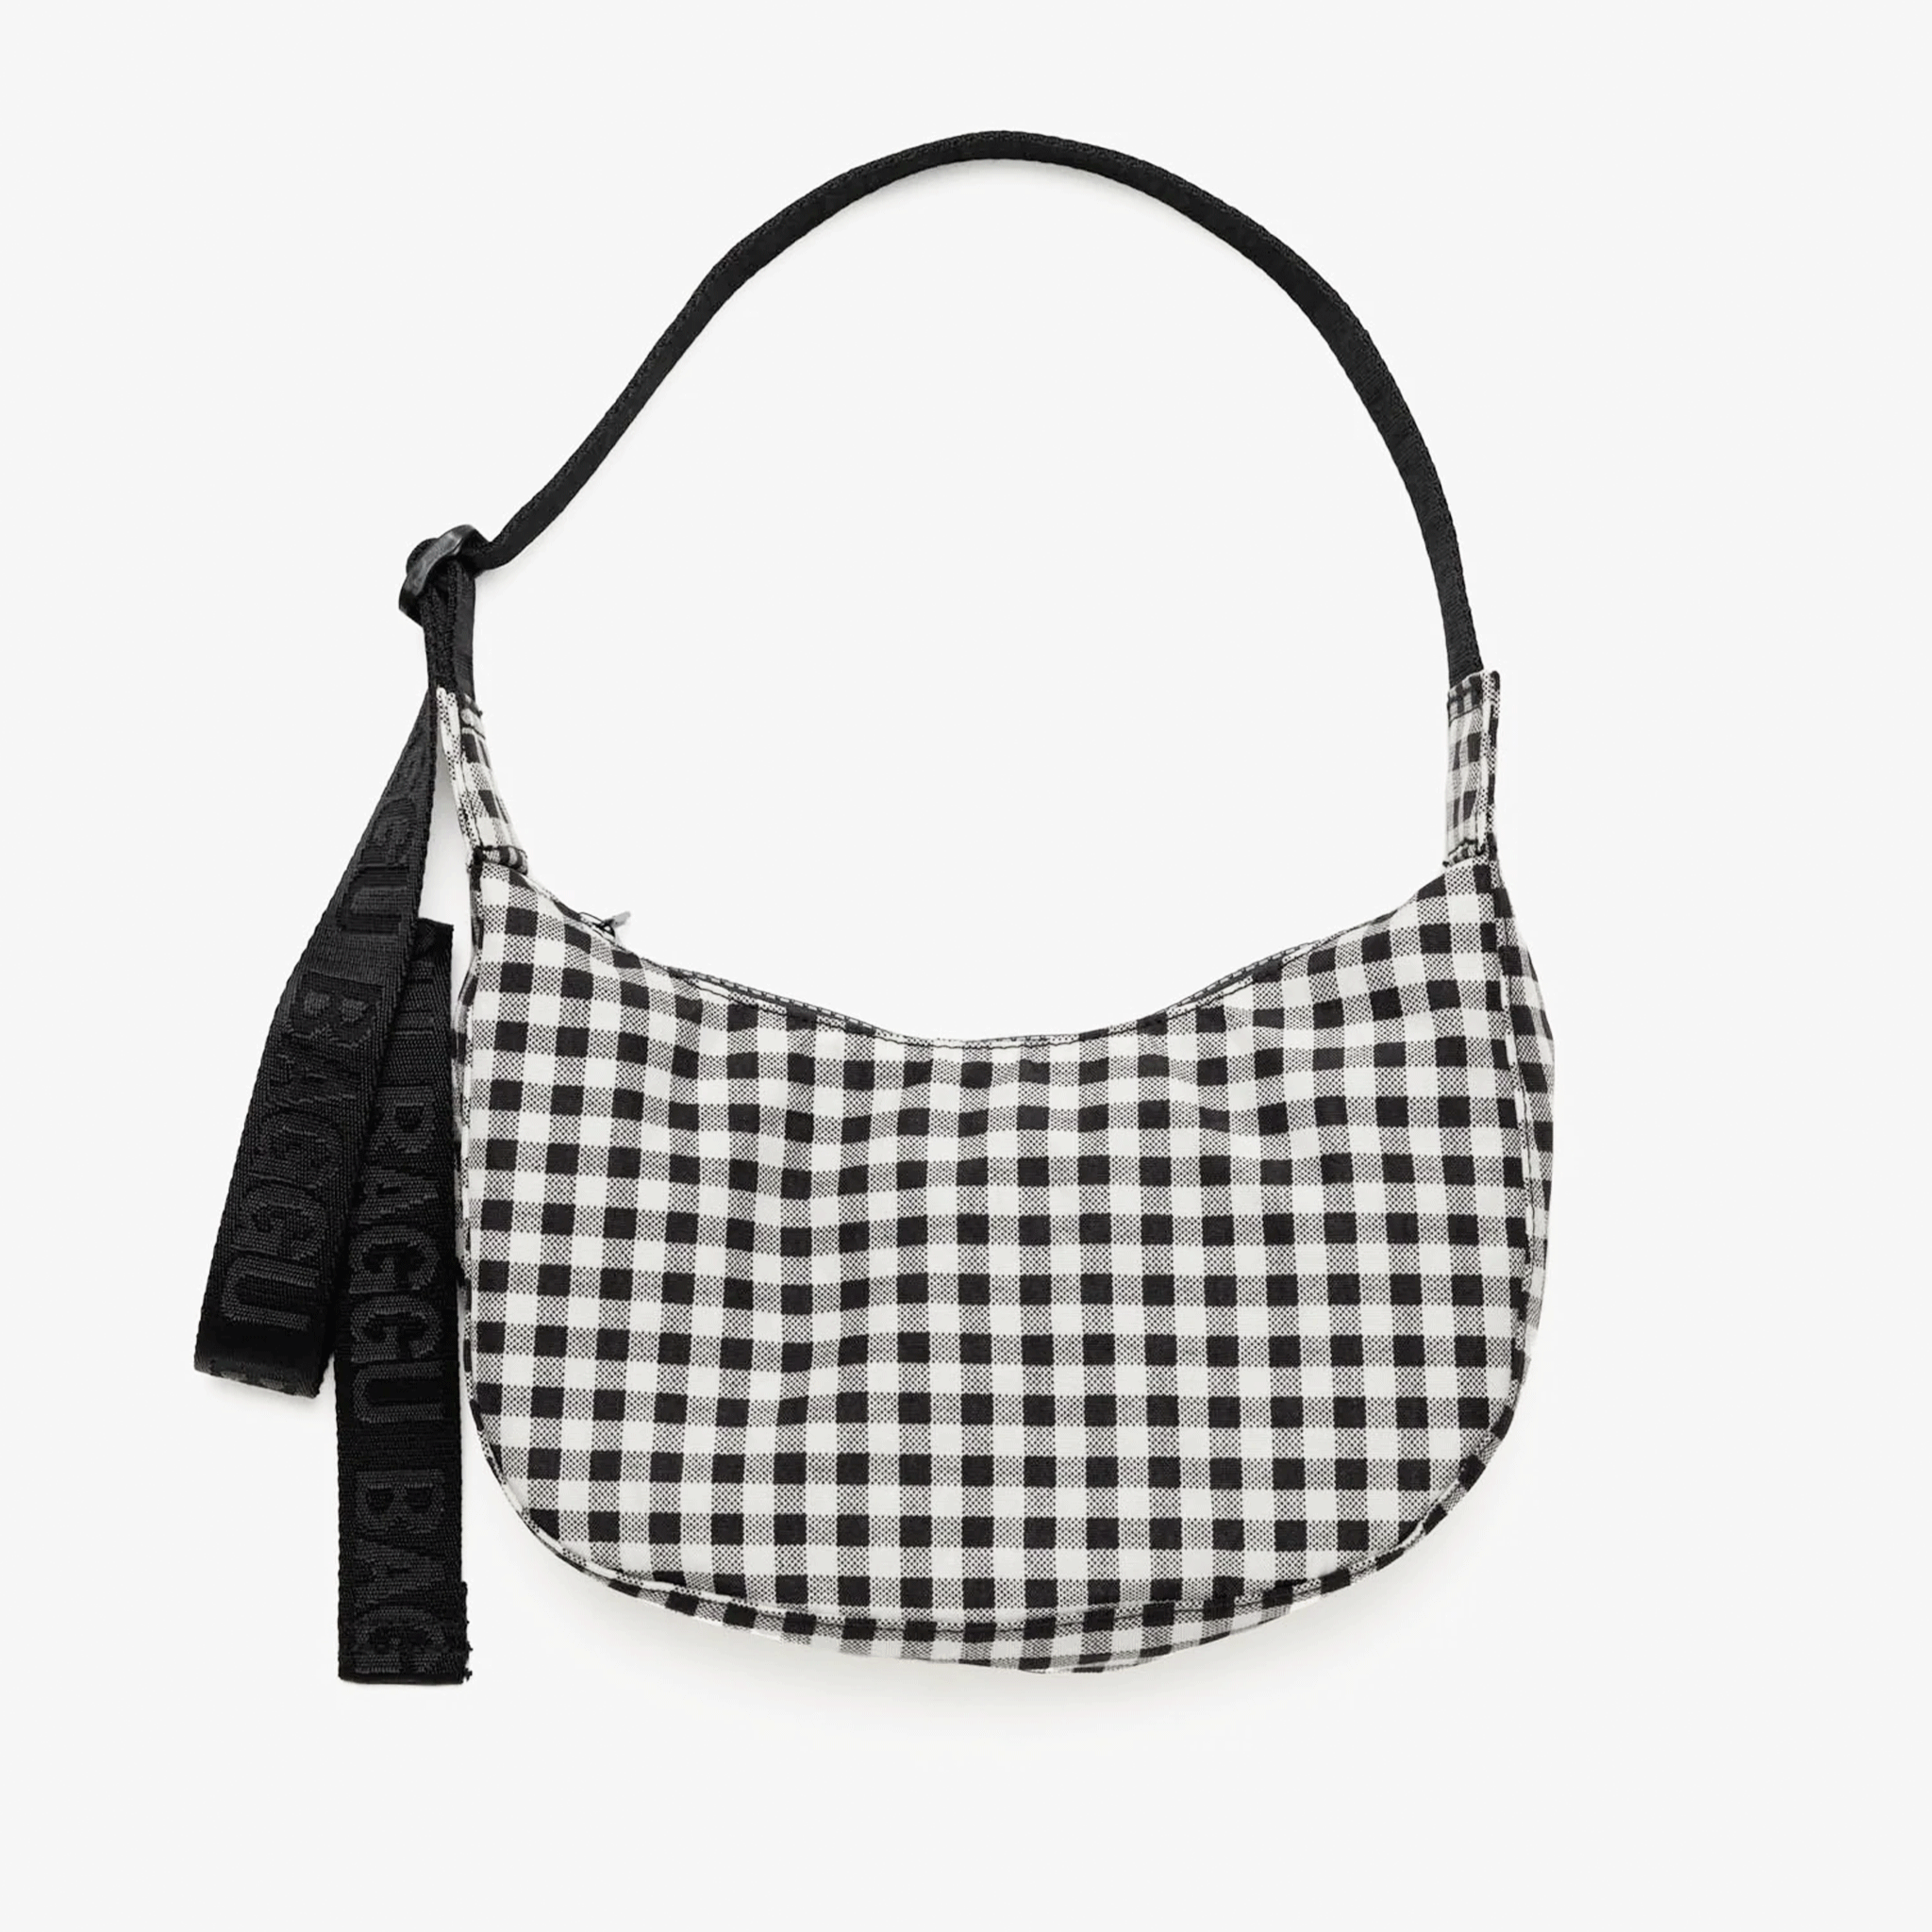 A black and white gingham printed crescent shaped nylon handbag with a black adjustable strap that can go from a shoulder bag to crossbody. 